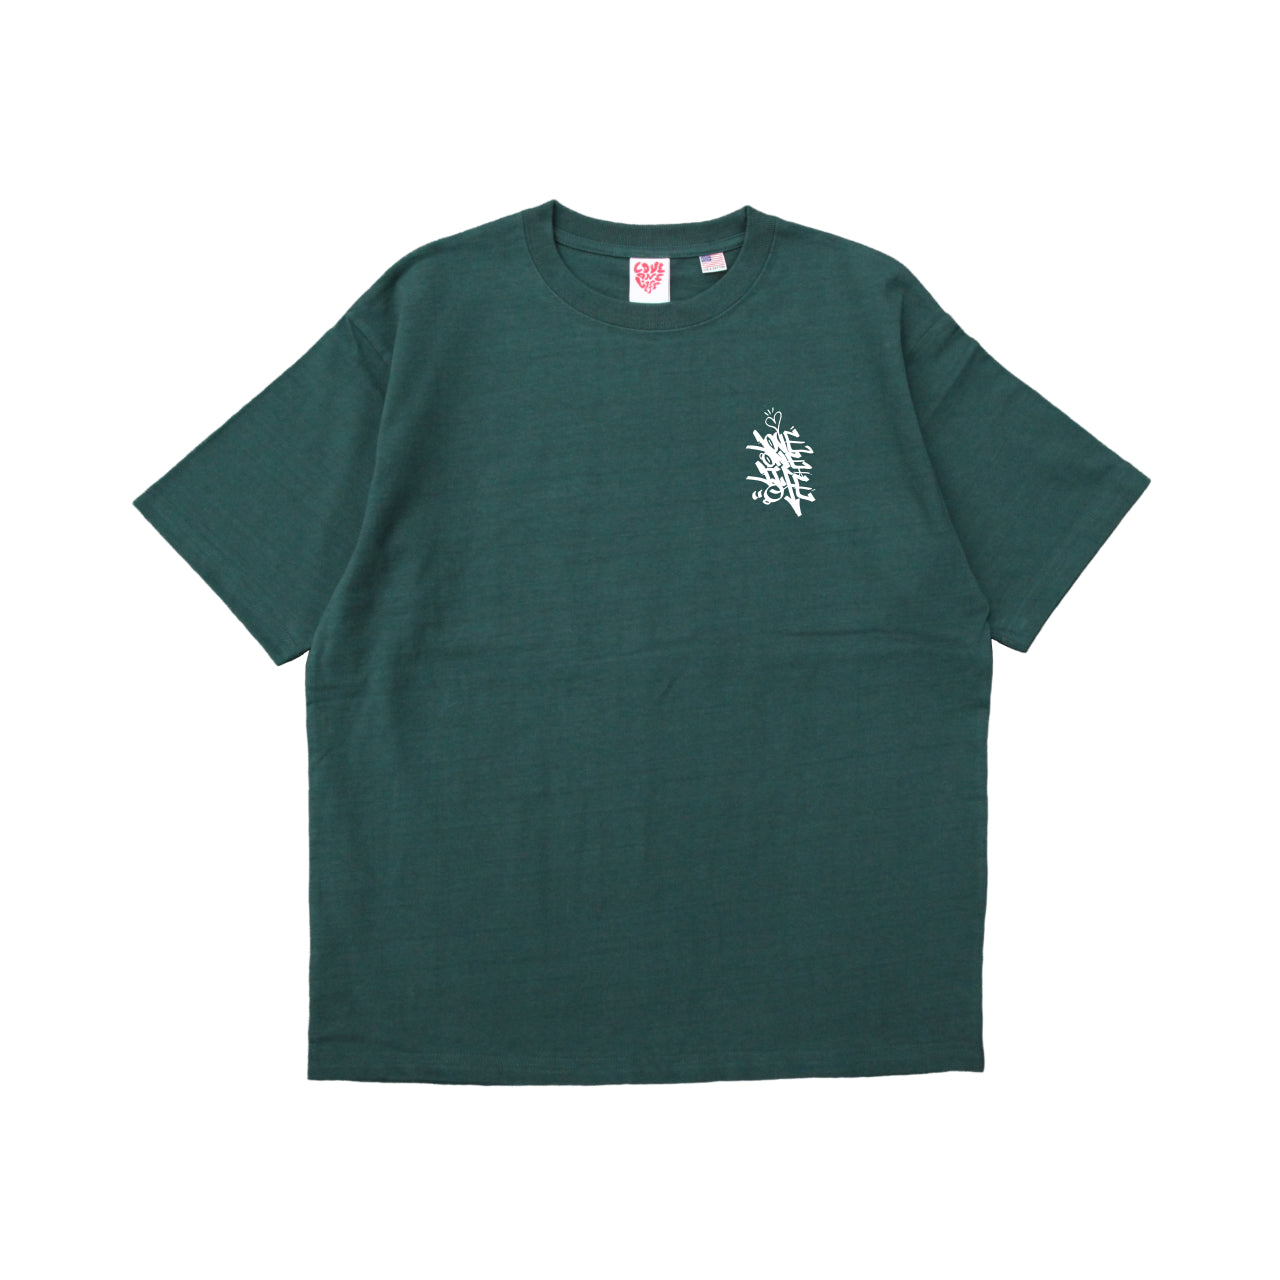 better soul tagging tee in deep green